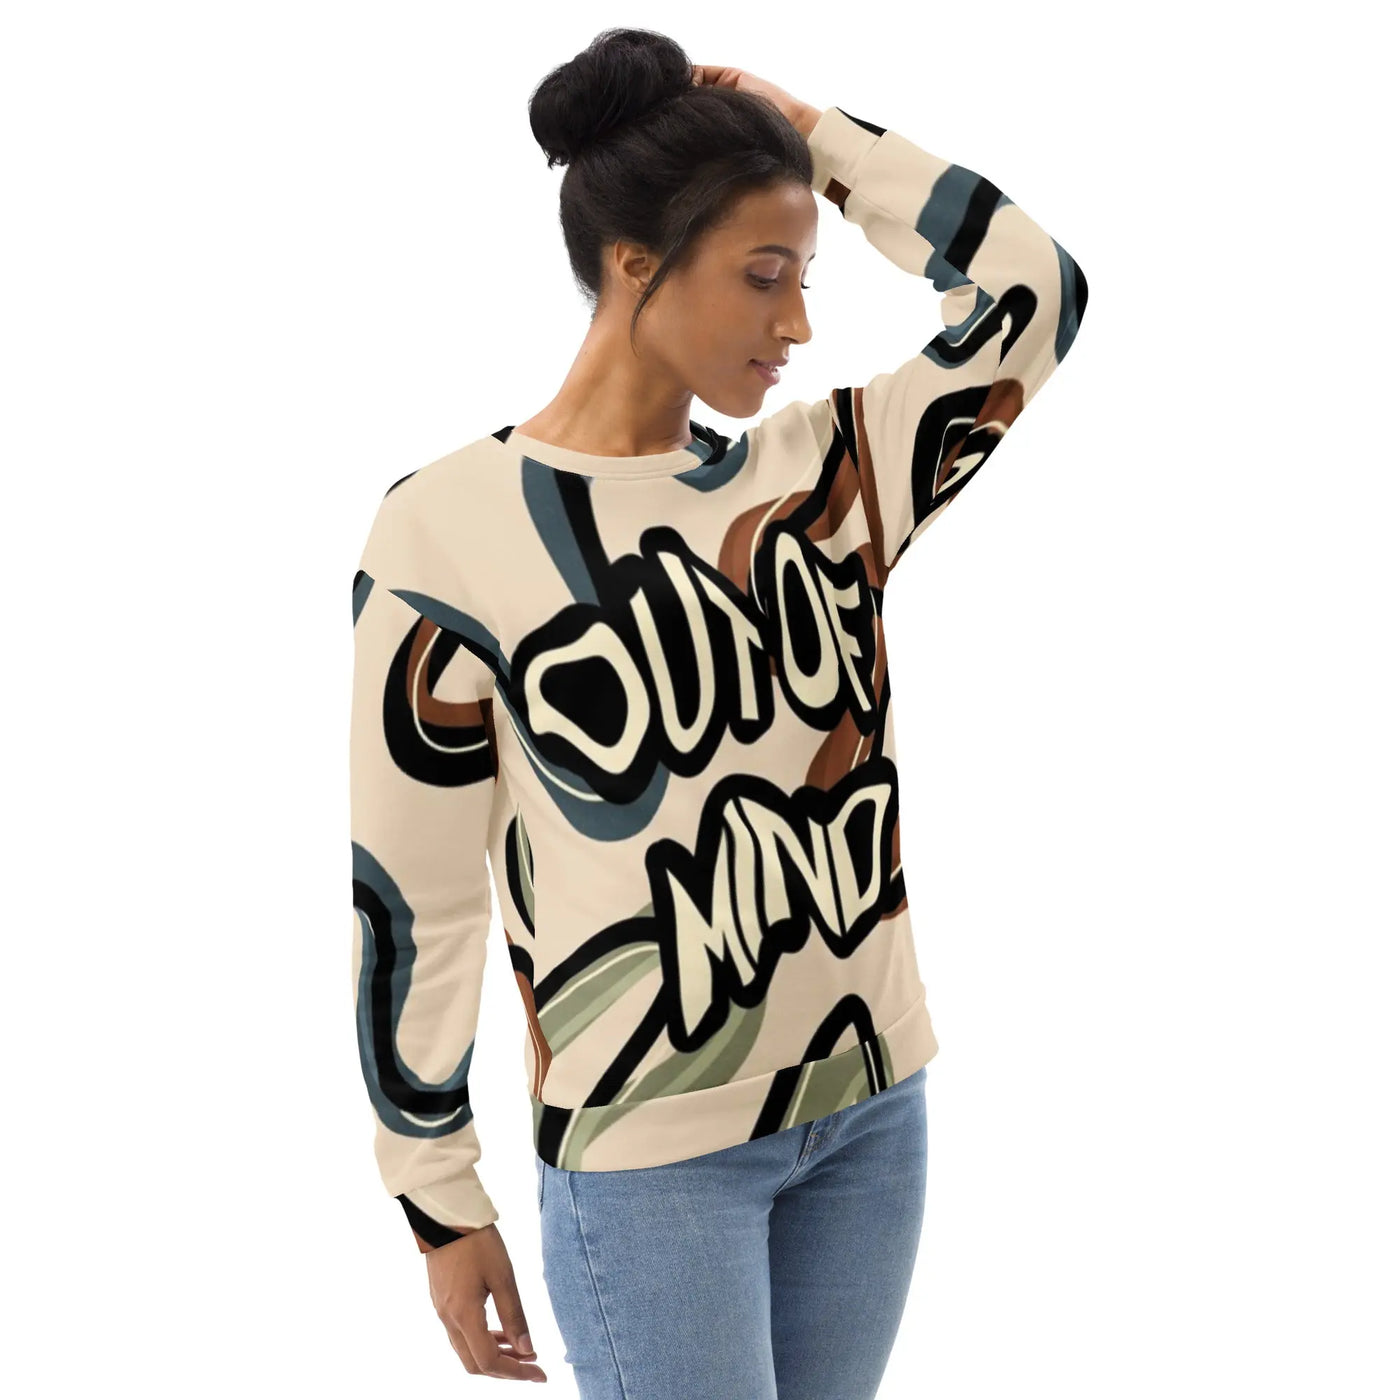 Out of Mind Sweatshirt